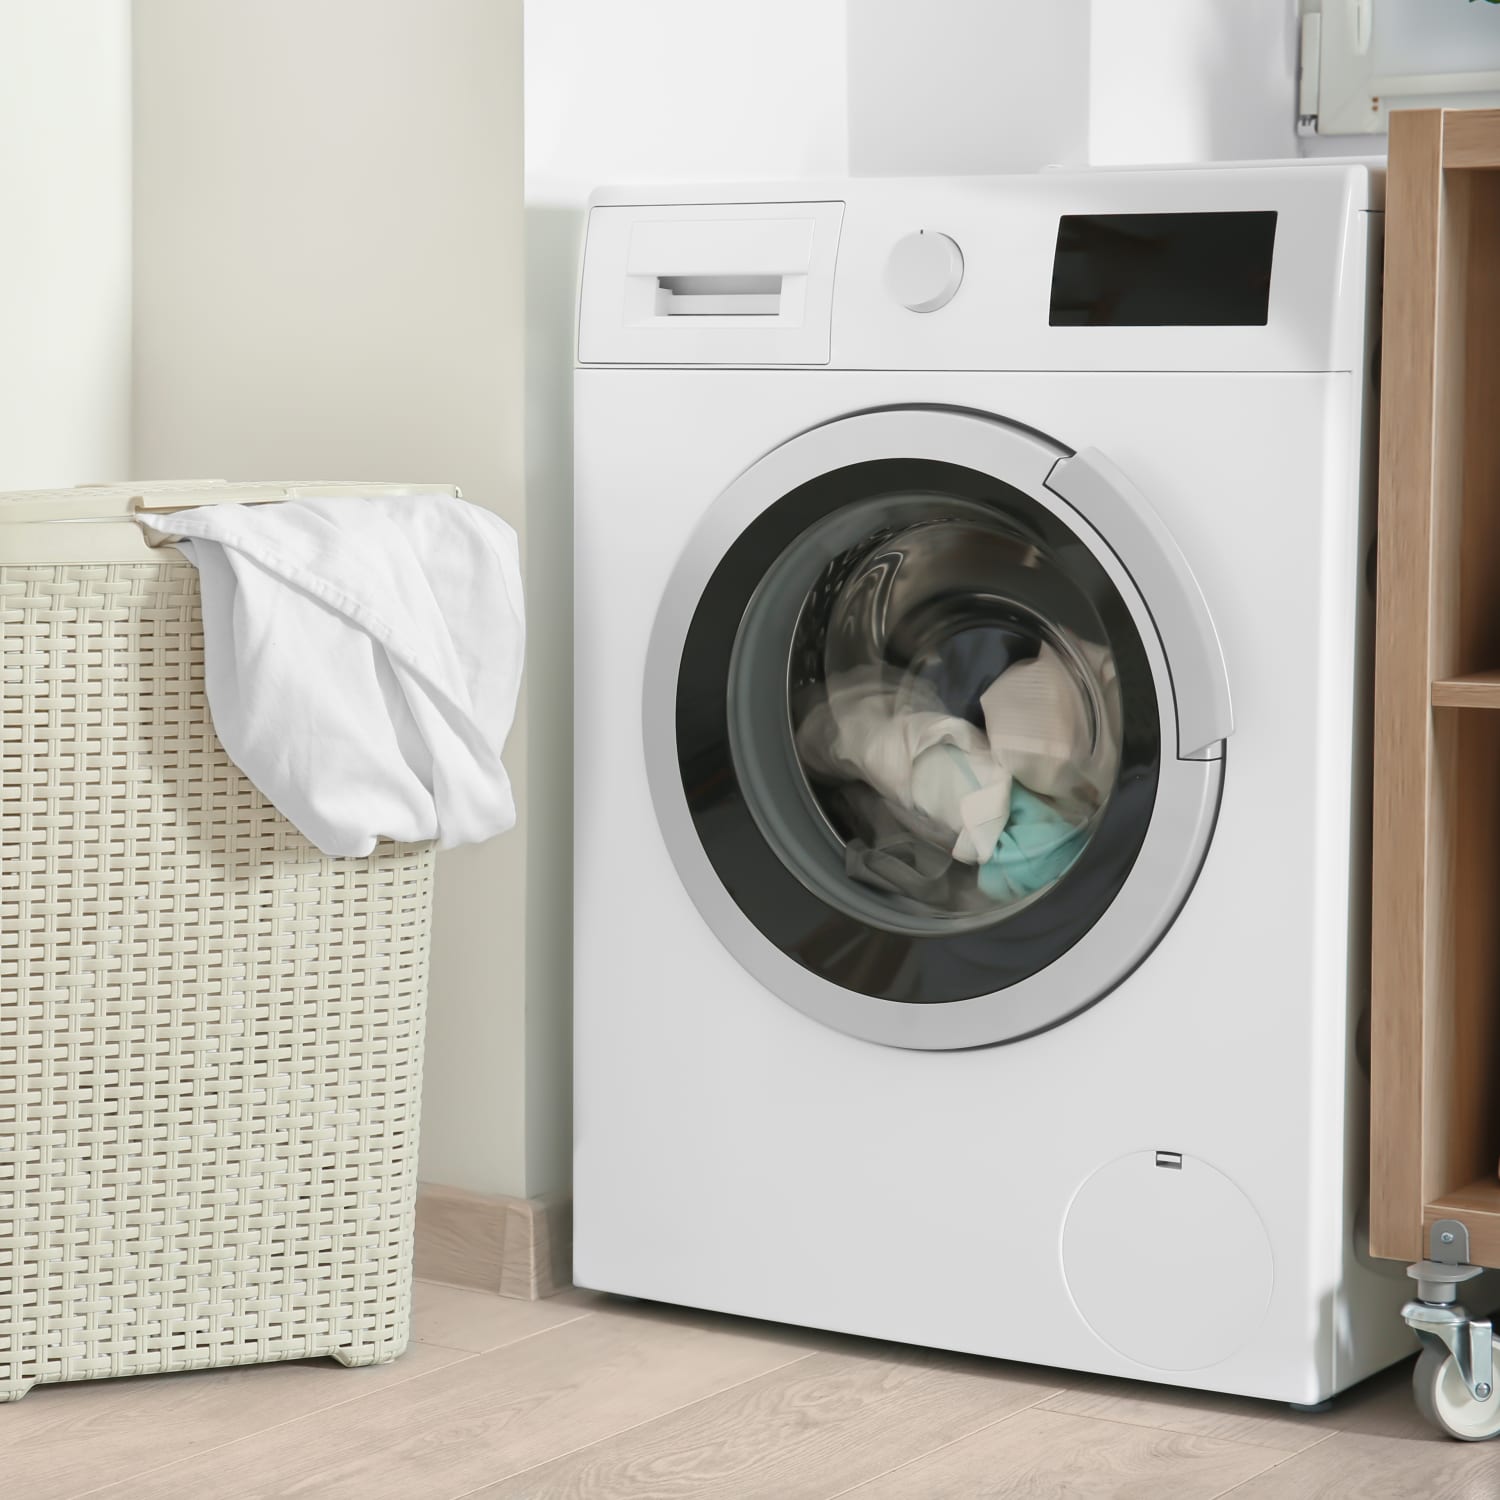 Why Putting a Wet Wipe Into the Washing Machine Can Save You a Ton of Time  and Nerves / Bright Side